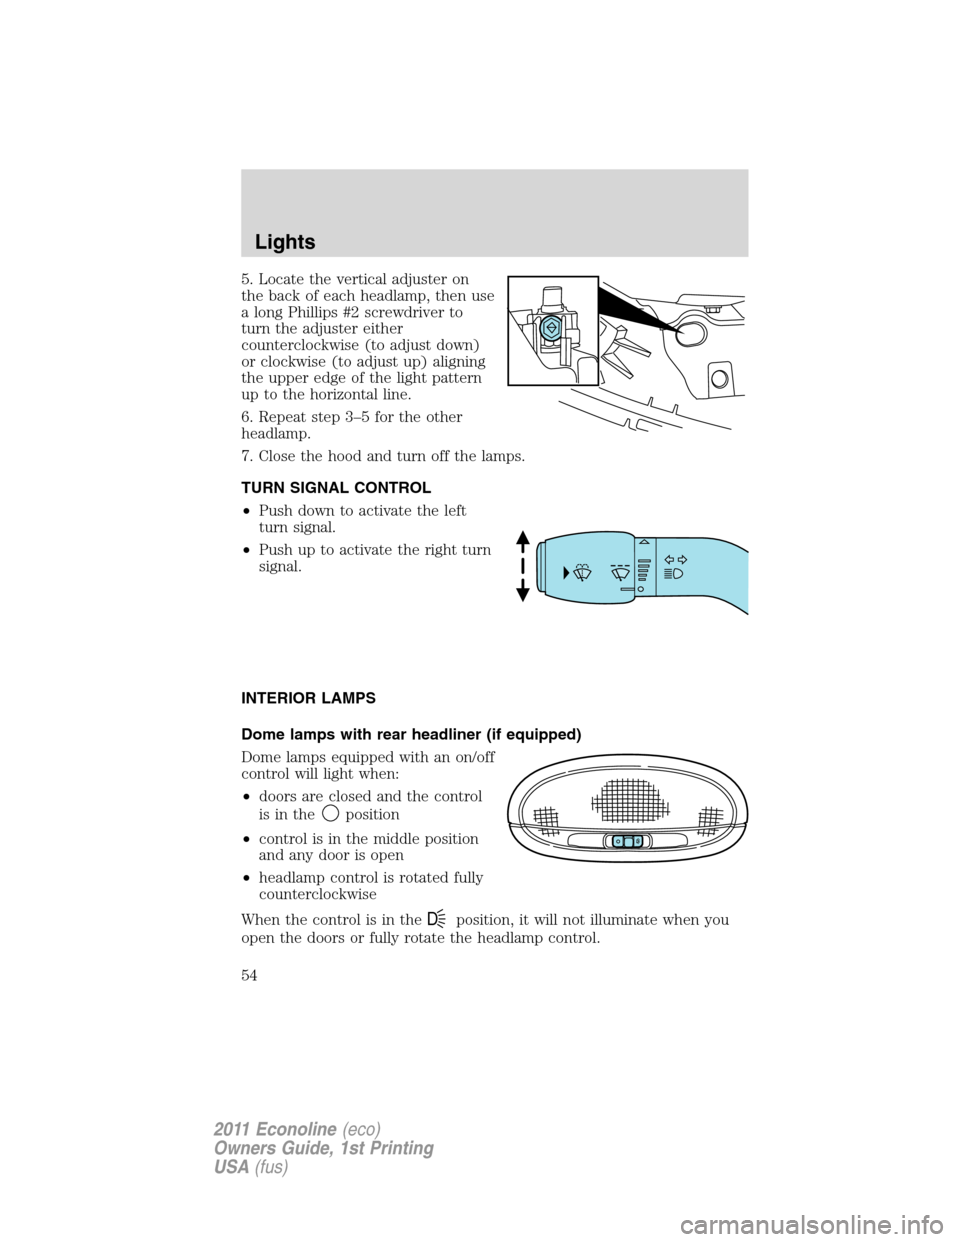 FORD E SERIES 2011 4.G Owners Manual 5. Locate the vertical adjuster on
the back of each headlamp, then use
a long Phillips #2 screwdriver to
turn the adjuster either
counterclockwise (to adjust down)
or clockwise (to adjust up) aligning